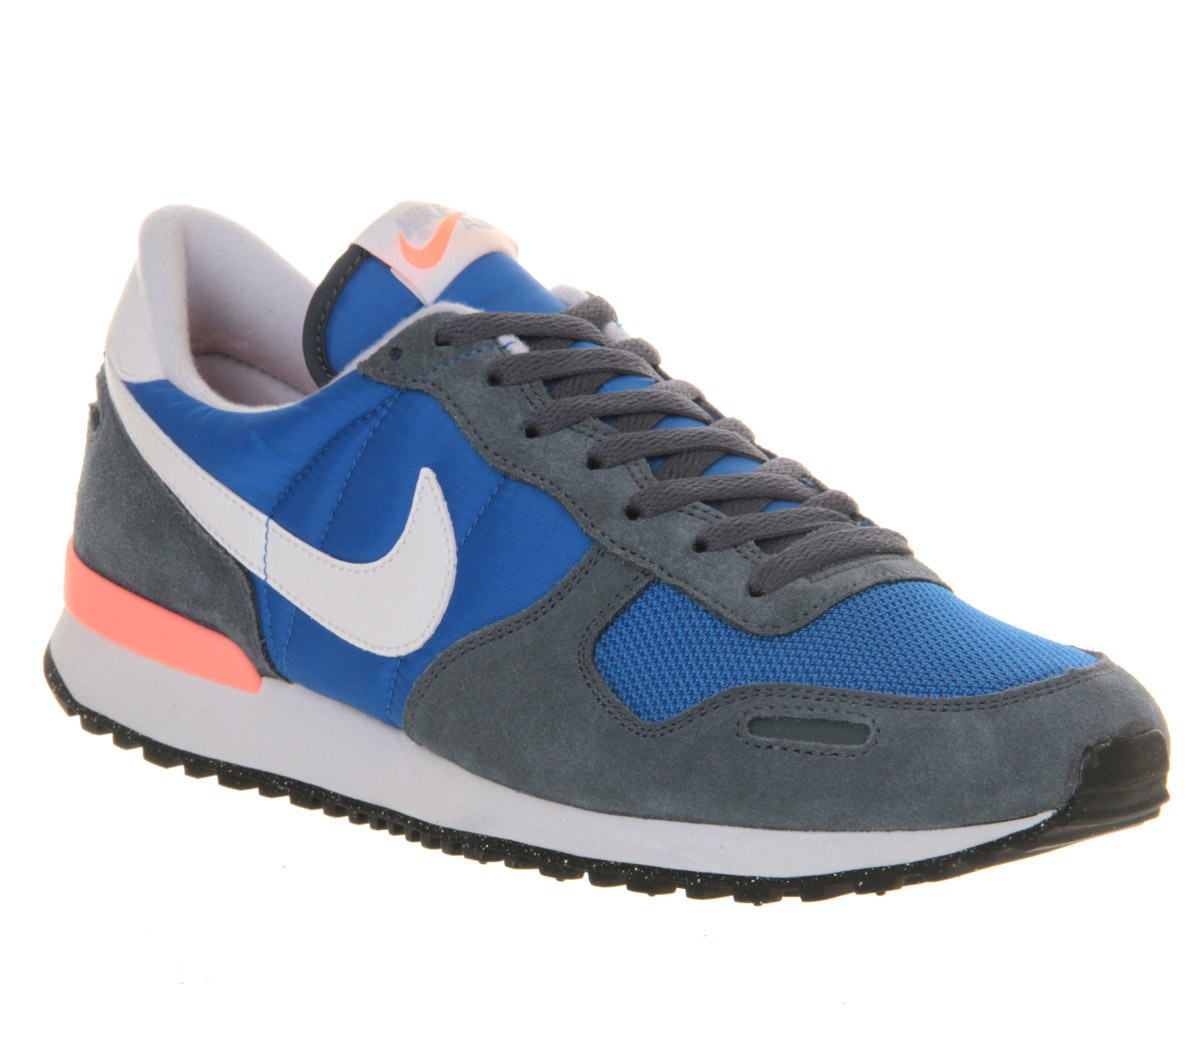 Nike Air Vortex Prize Blue White - His trainers